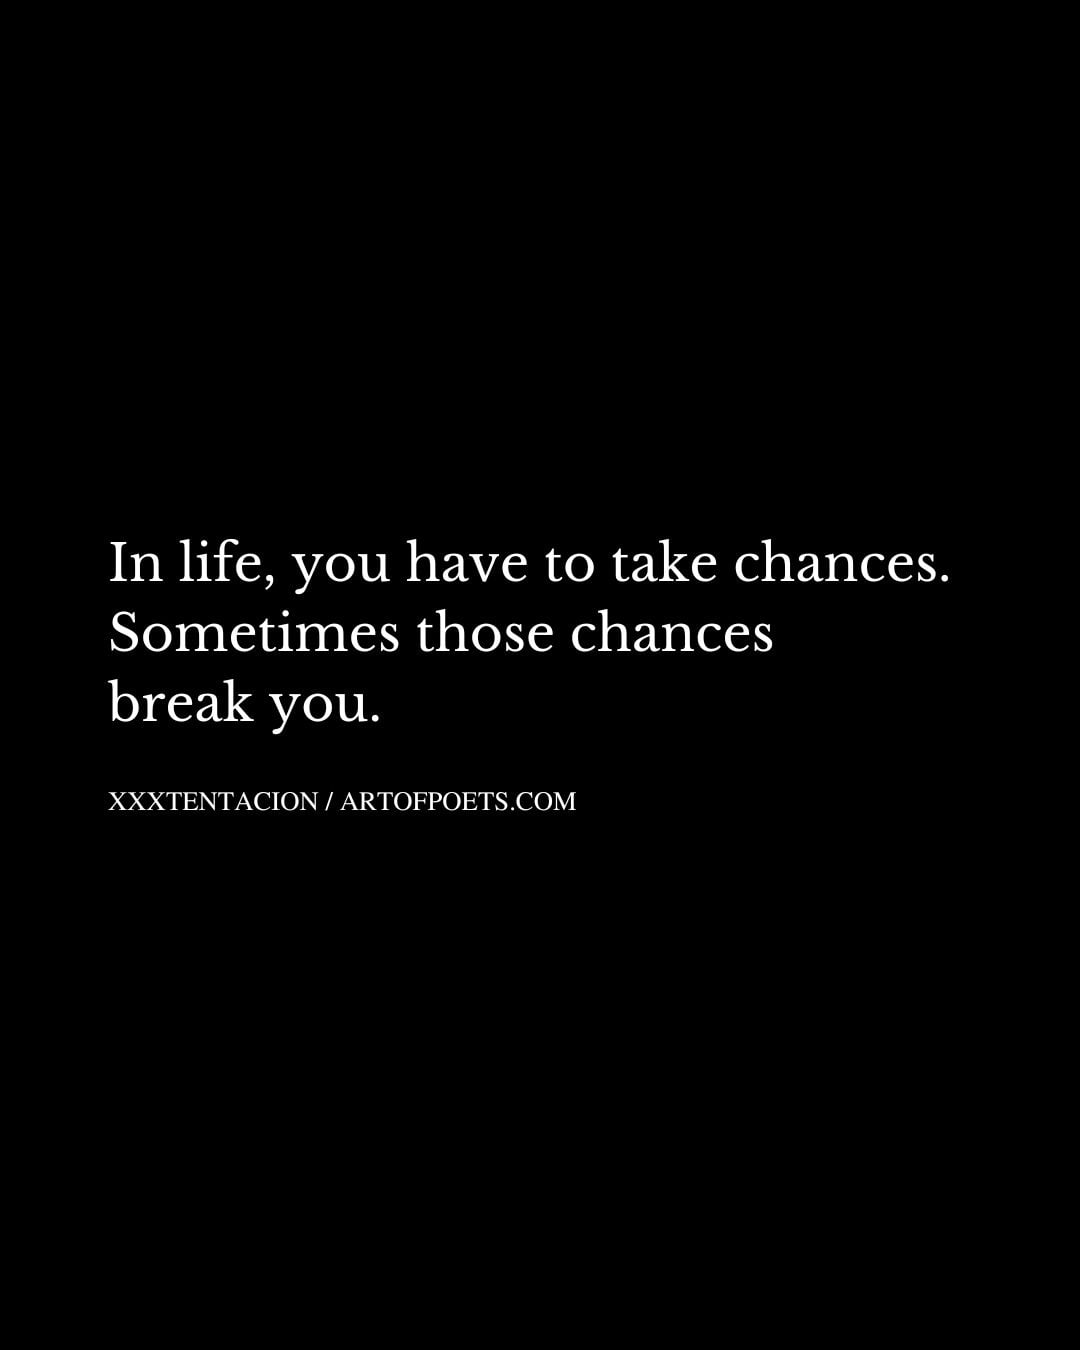 In life you have to take chances. Sometimes those chances break you